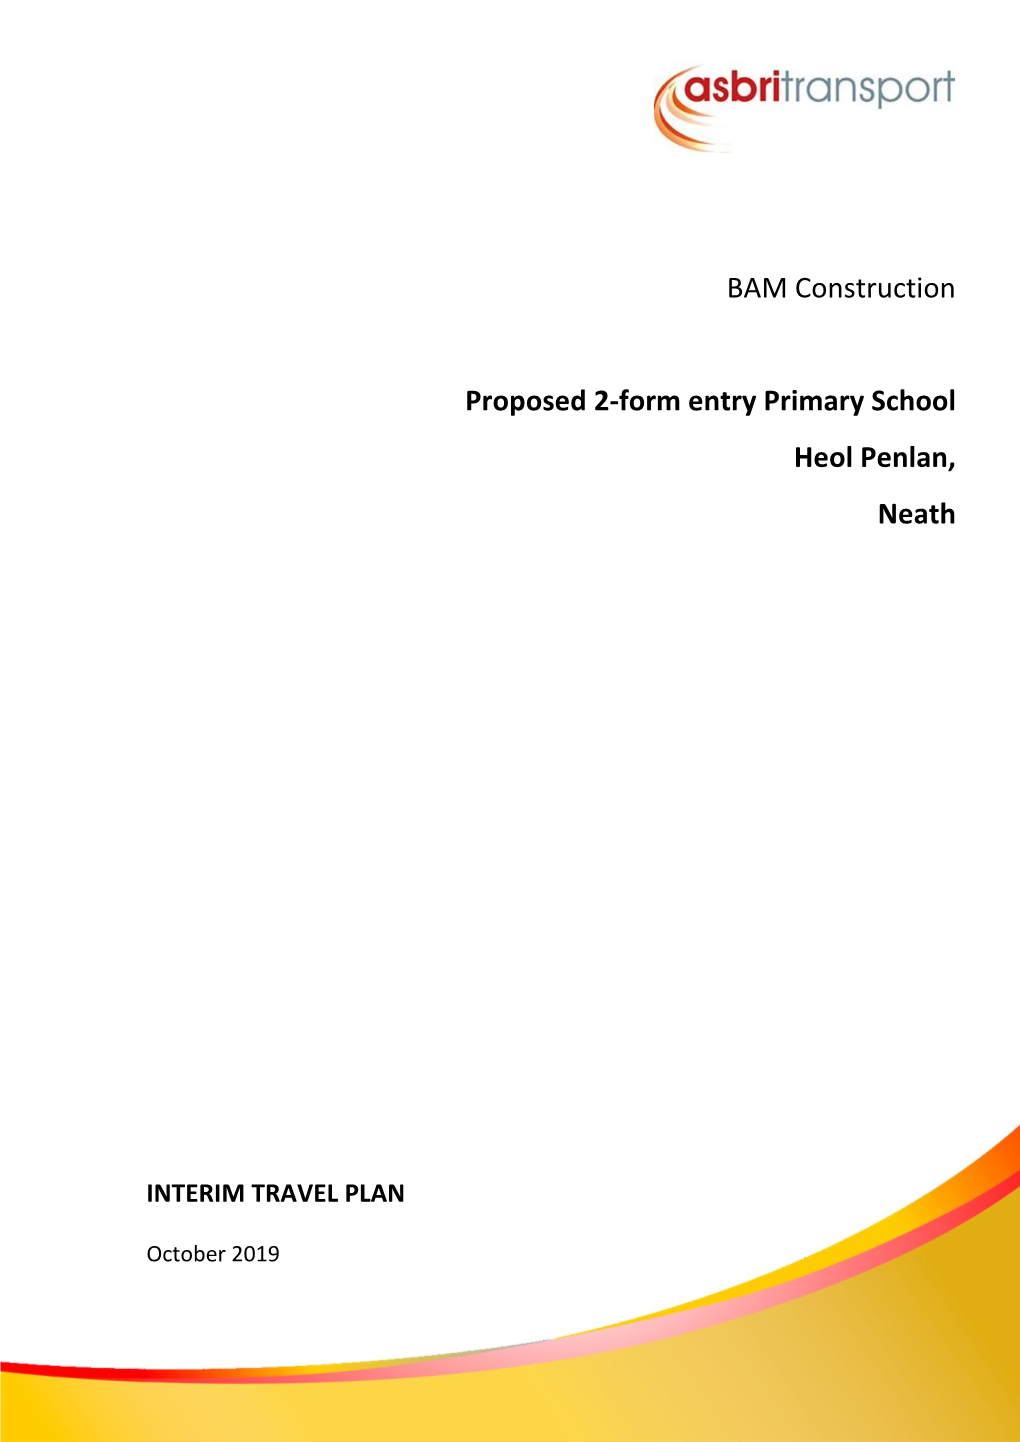 BAM Construction Proposed 2-Form Entry Primary School Heol Penlan, Neath